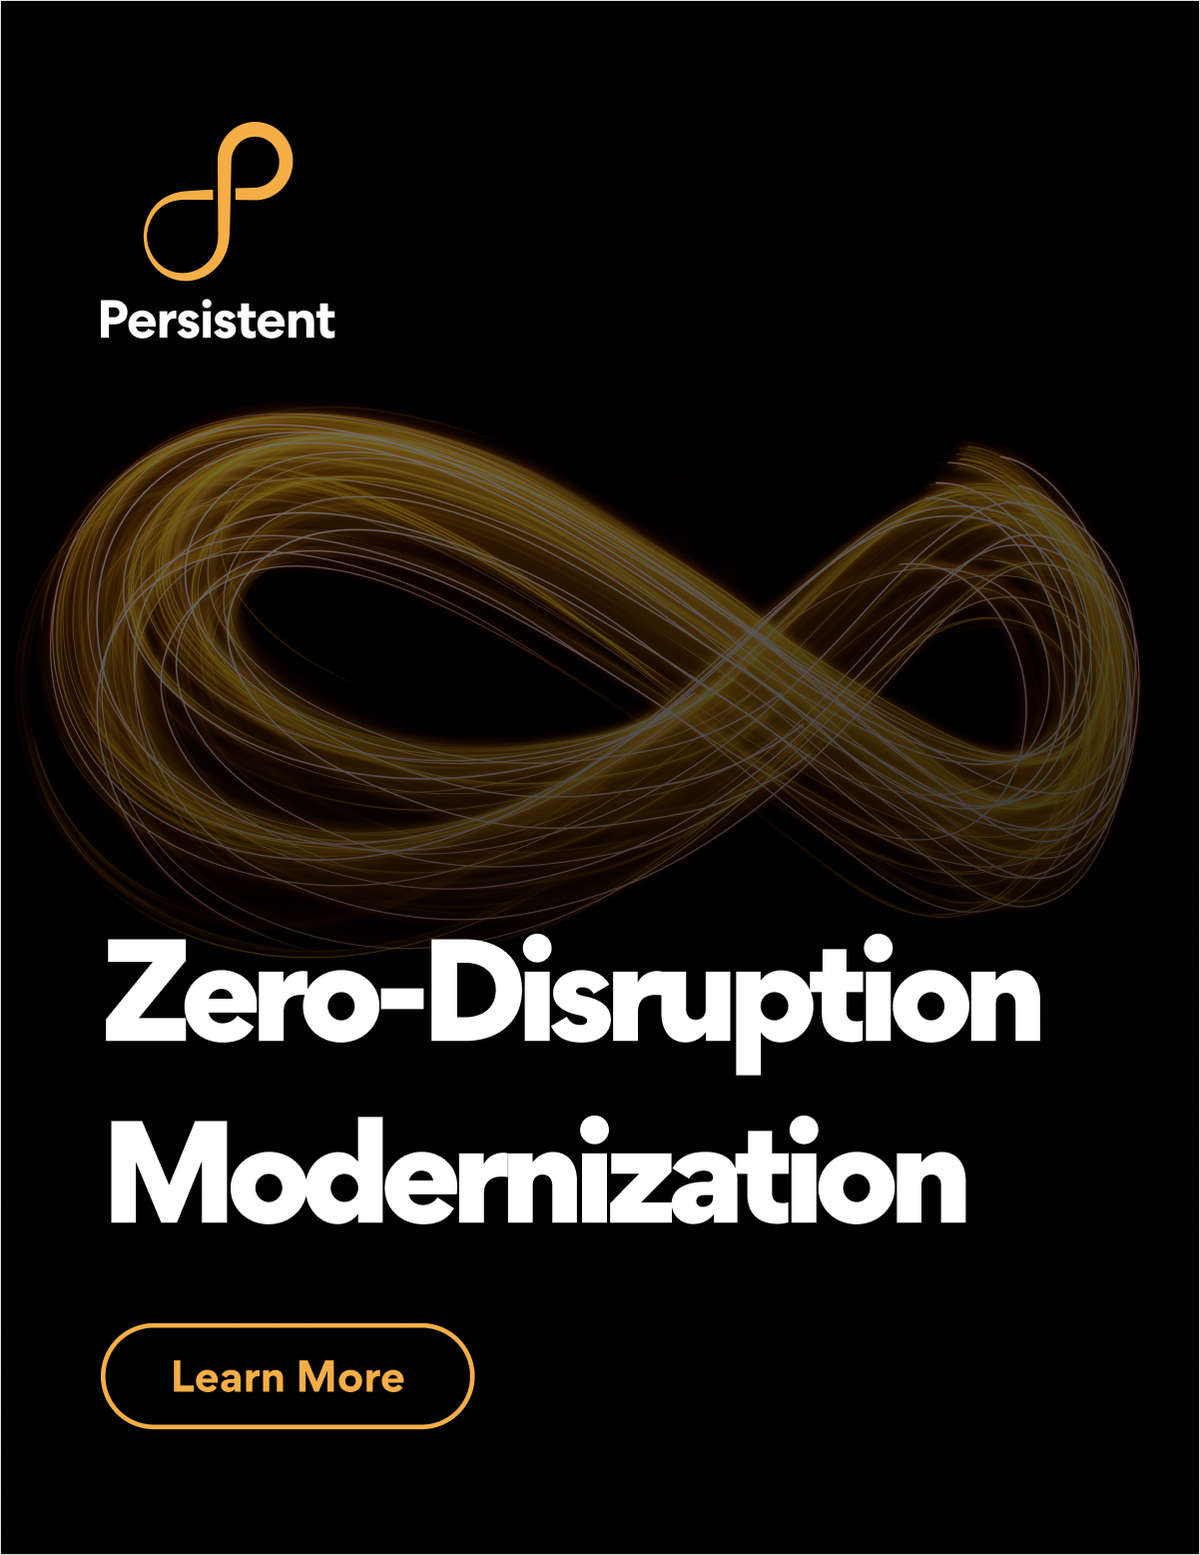 Learn how we help enterprises become resilient, responsive, and relevant by modernizing their legacy IT landscape with zero disruption